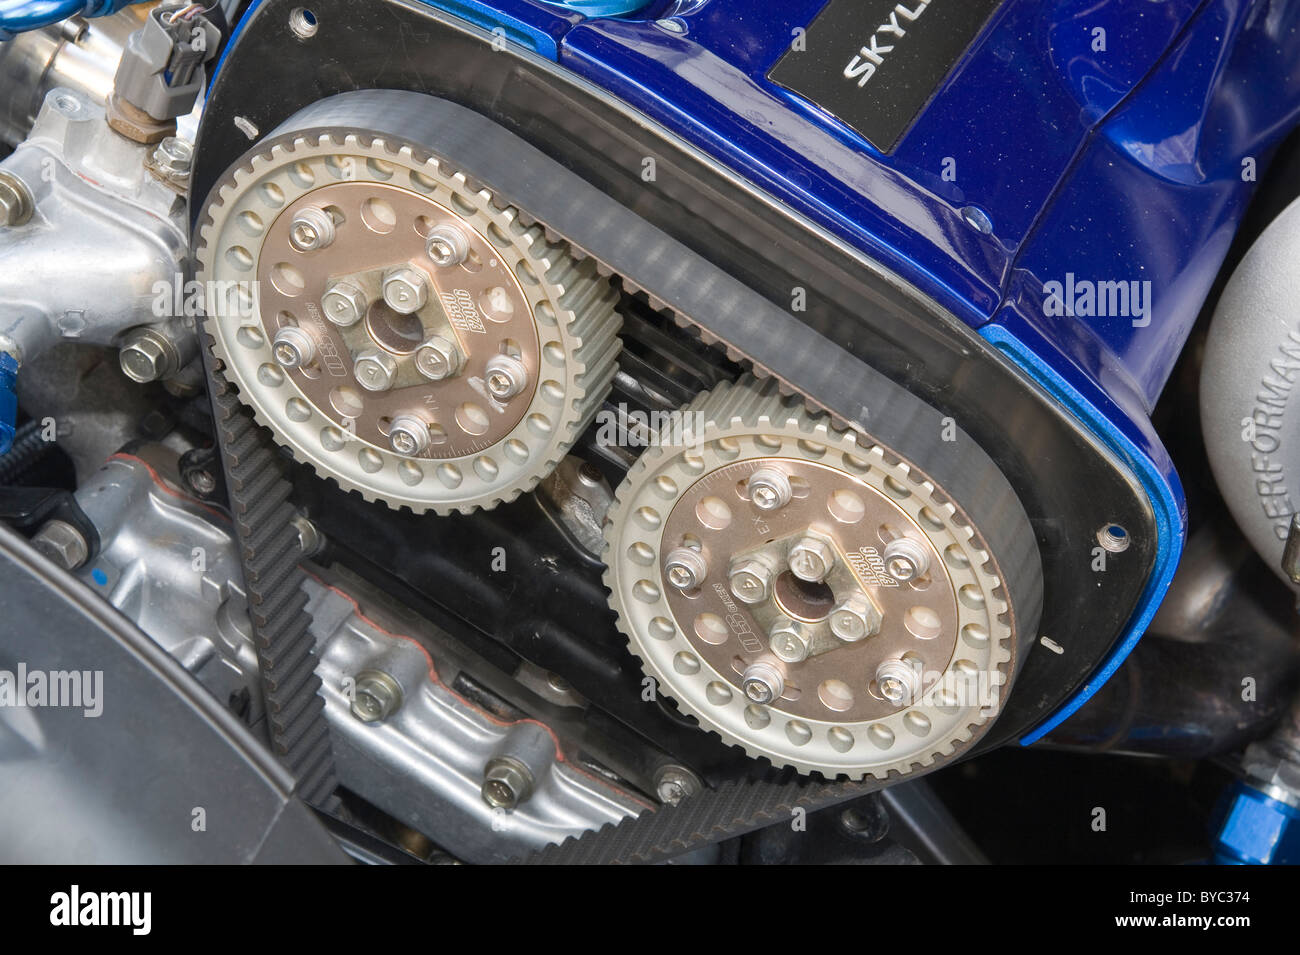 High performance adjustable camshaft gears on a heavily modified Nissan RB26DET engine. Stock Photo